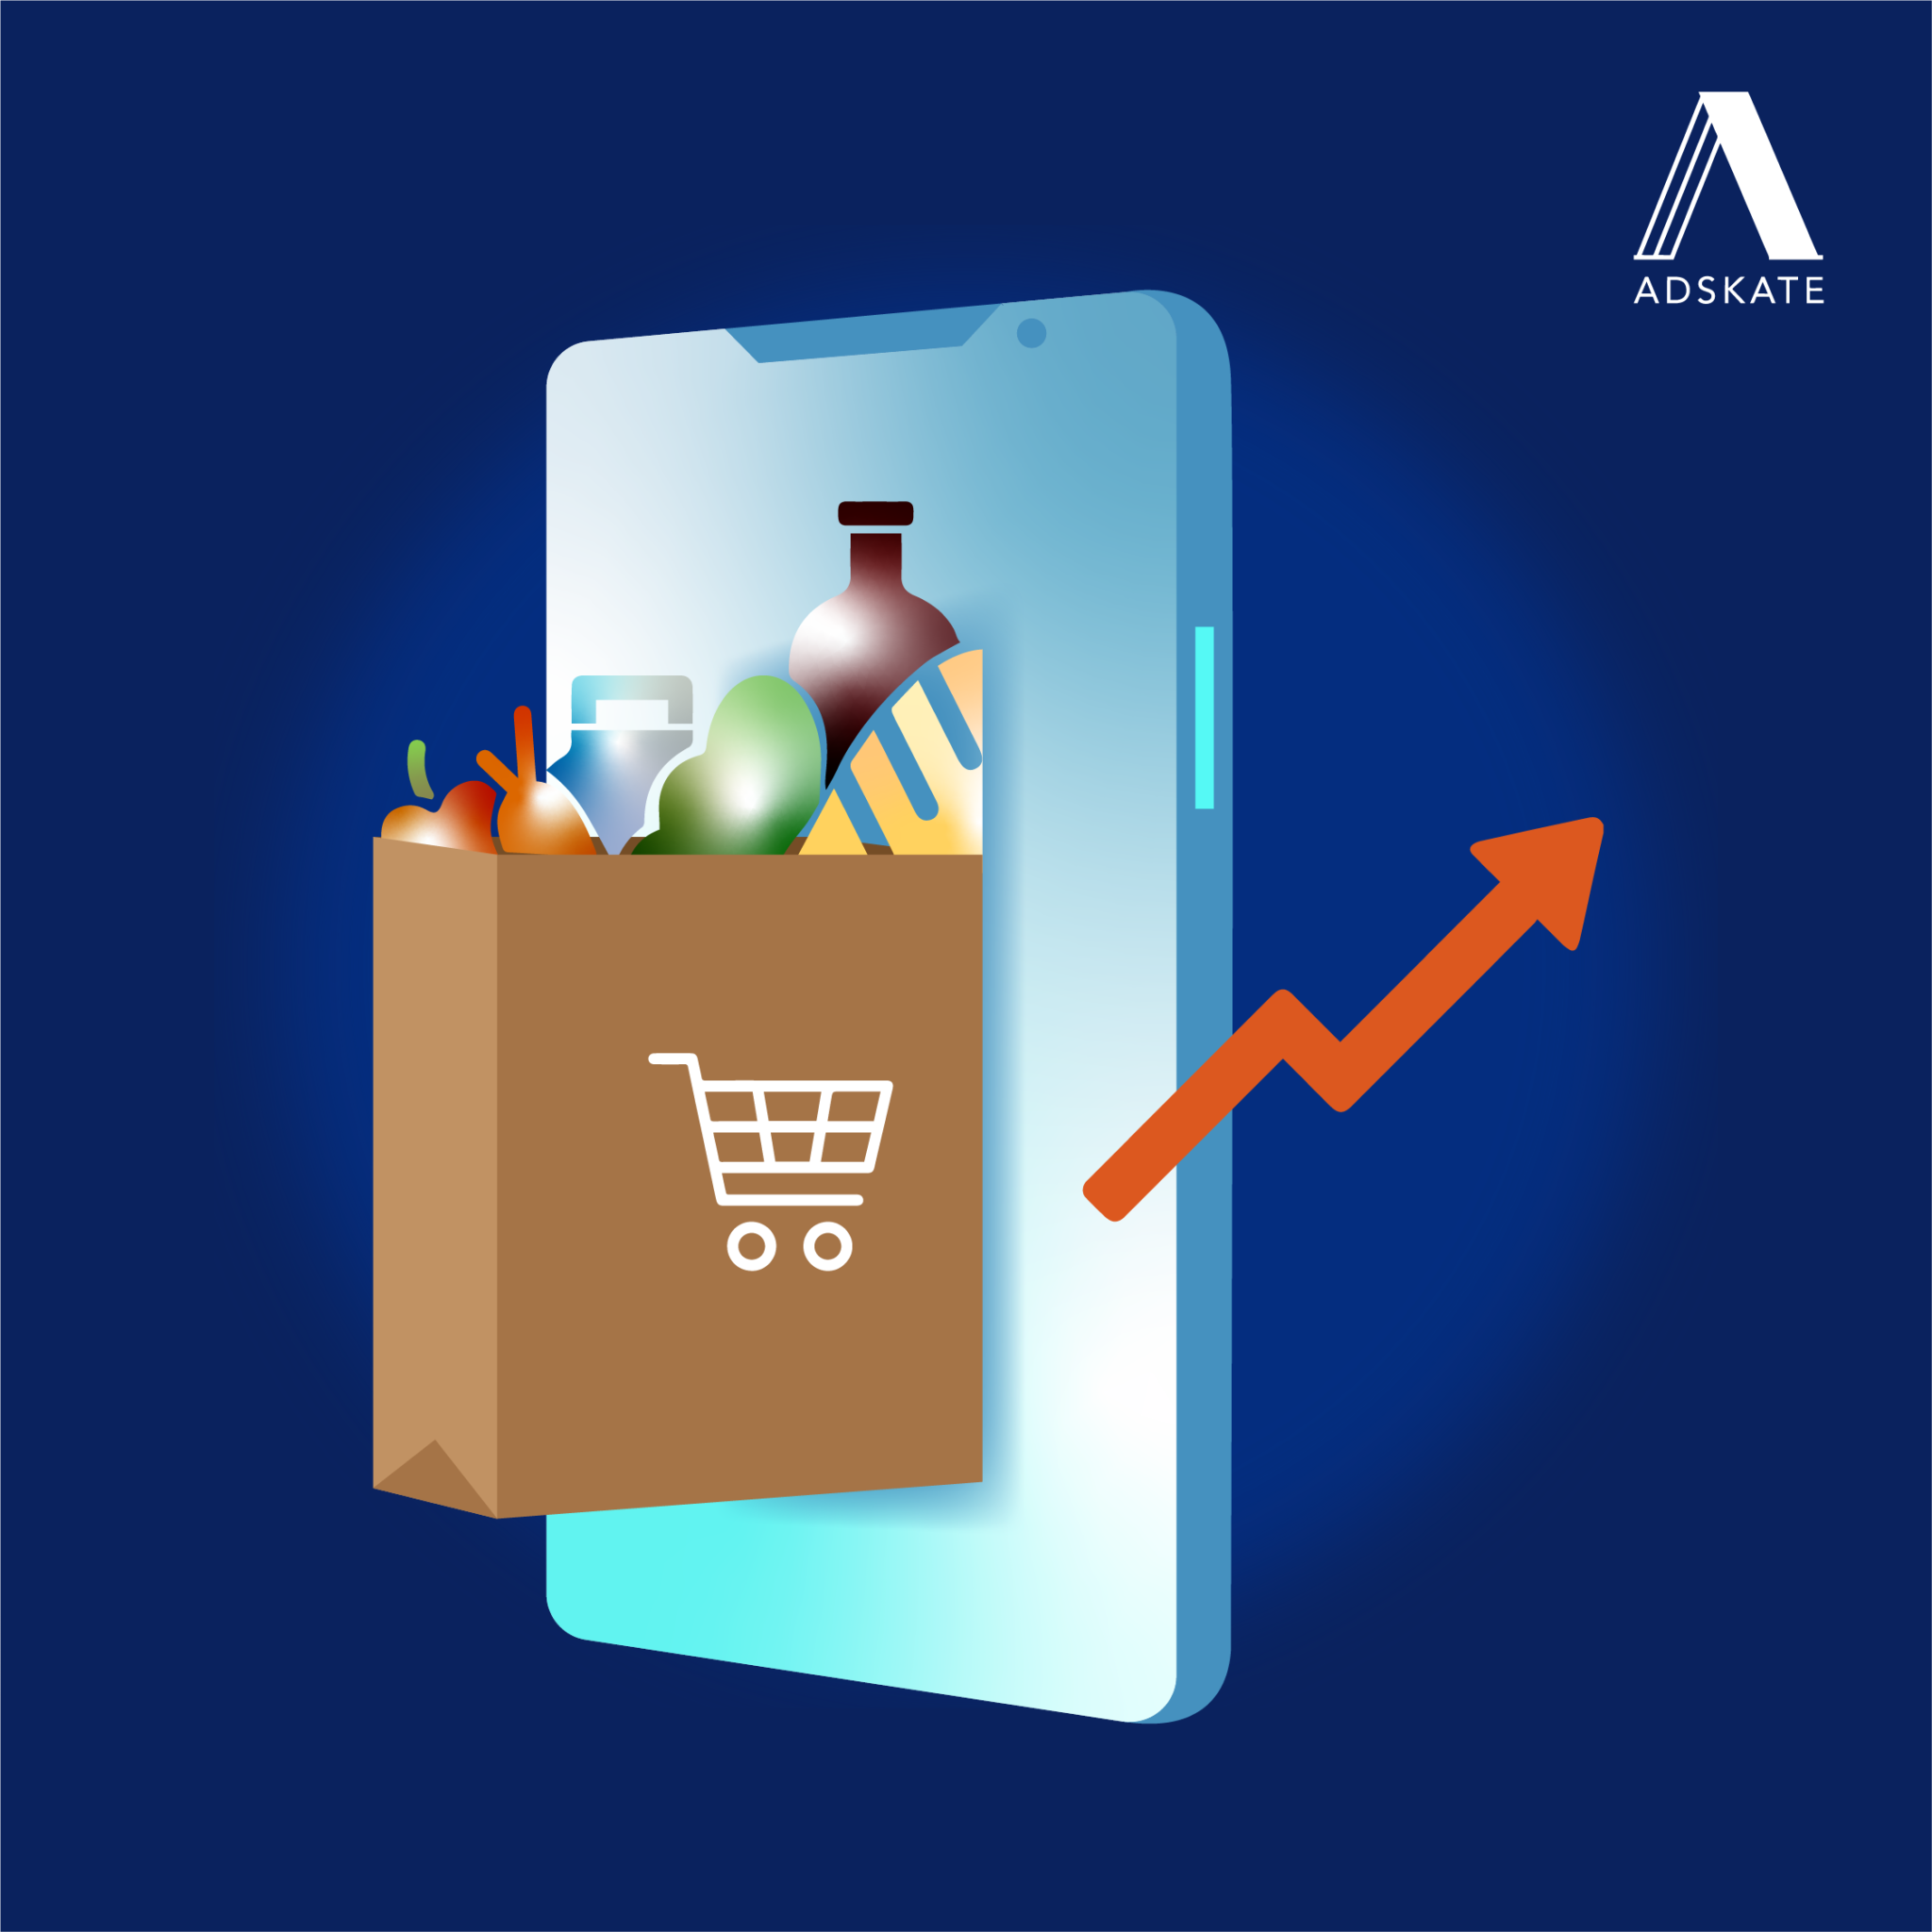 Increasing spending patterns in online grocery shopping and shift in the digital advertising